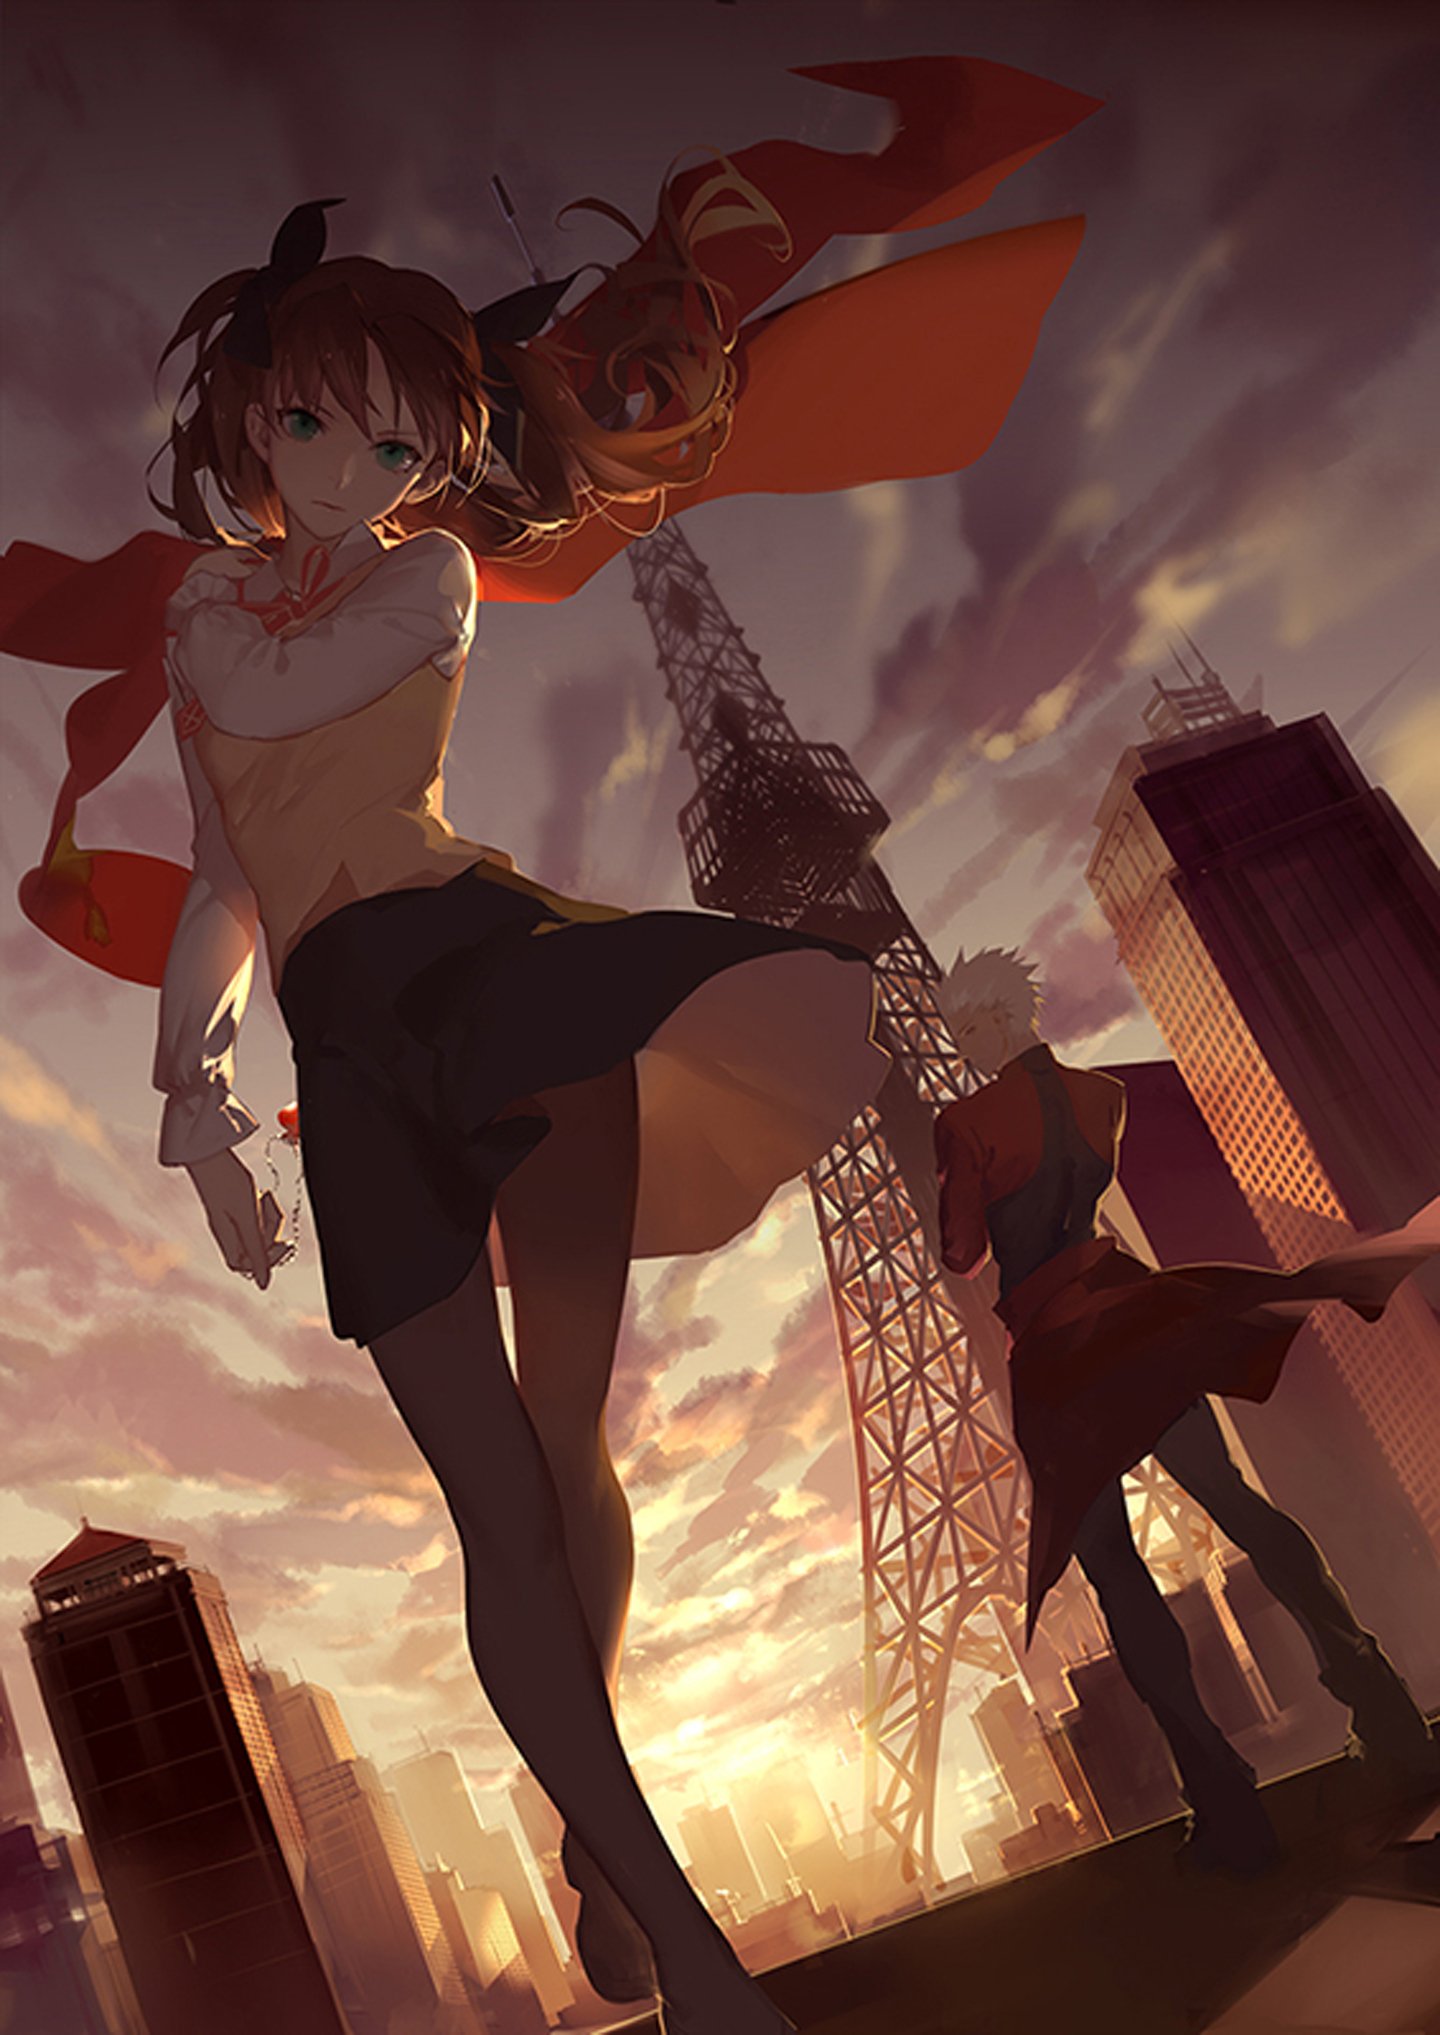 fate, Anime, Series, Character, Male, Girl, Couple, Sky Wallpaper